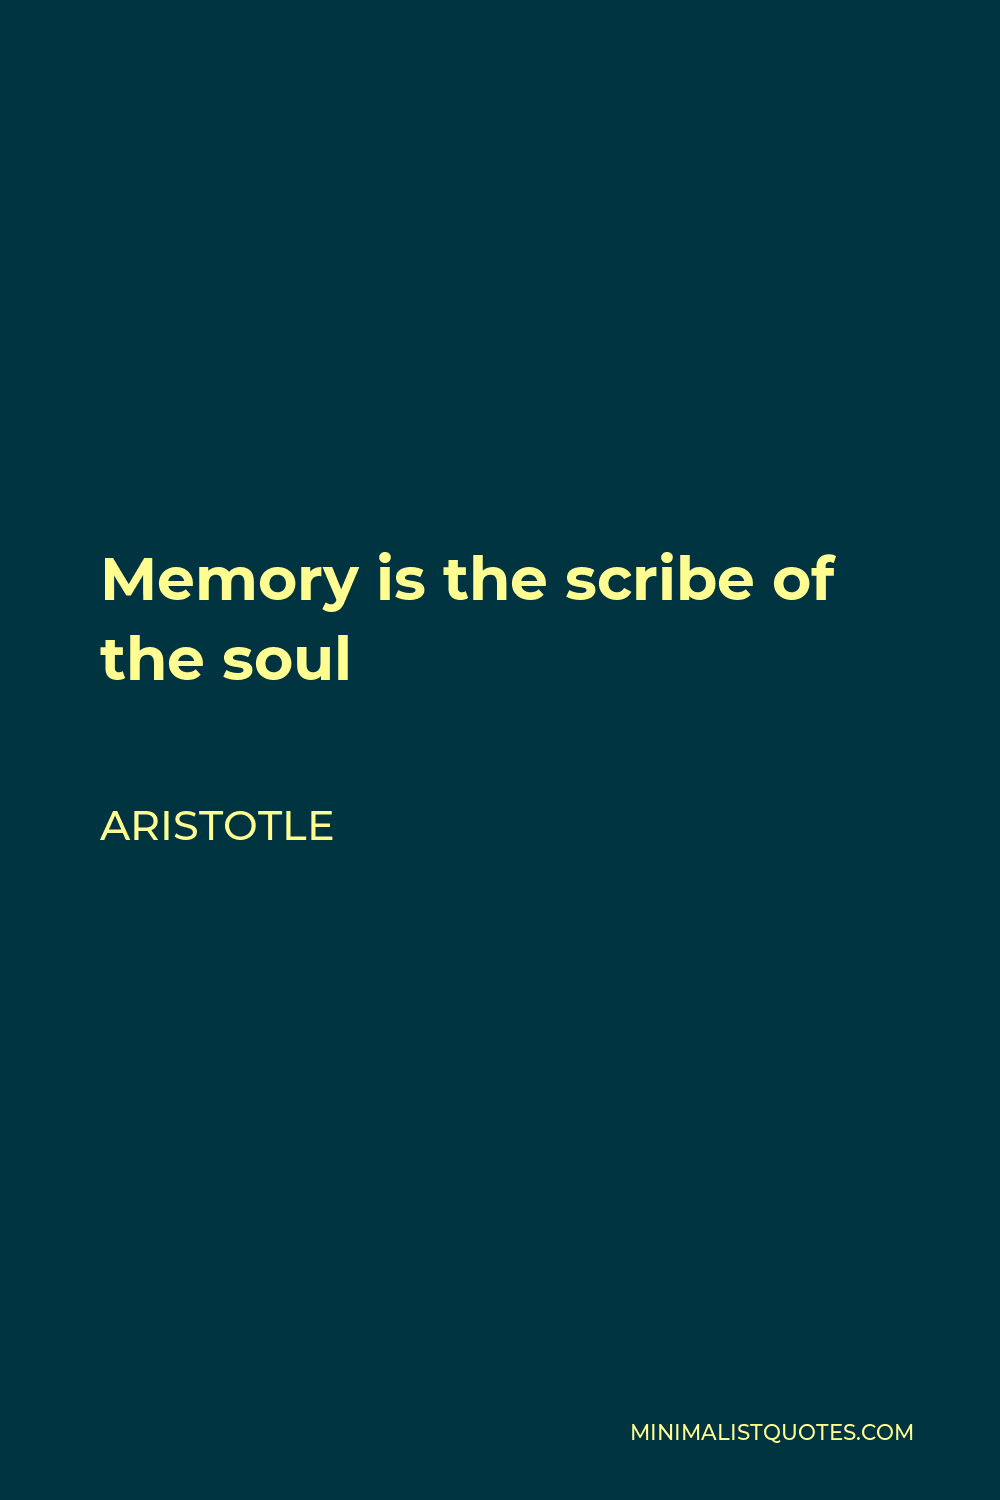 Aristotle Quote - Memory is the scribe of the soul